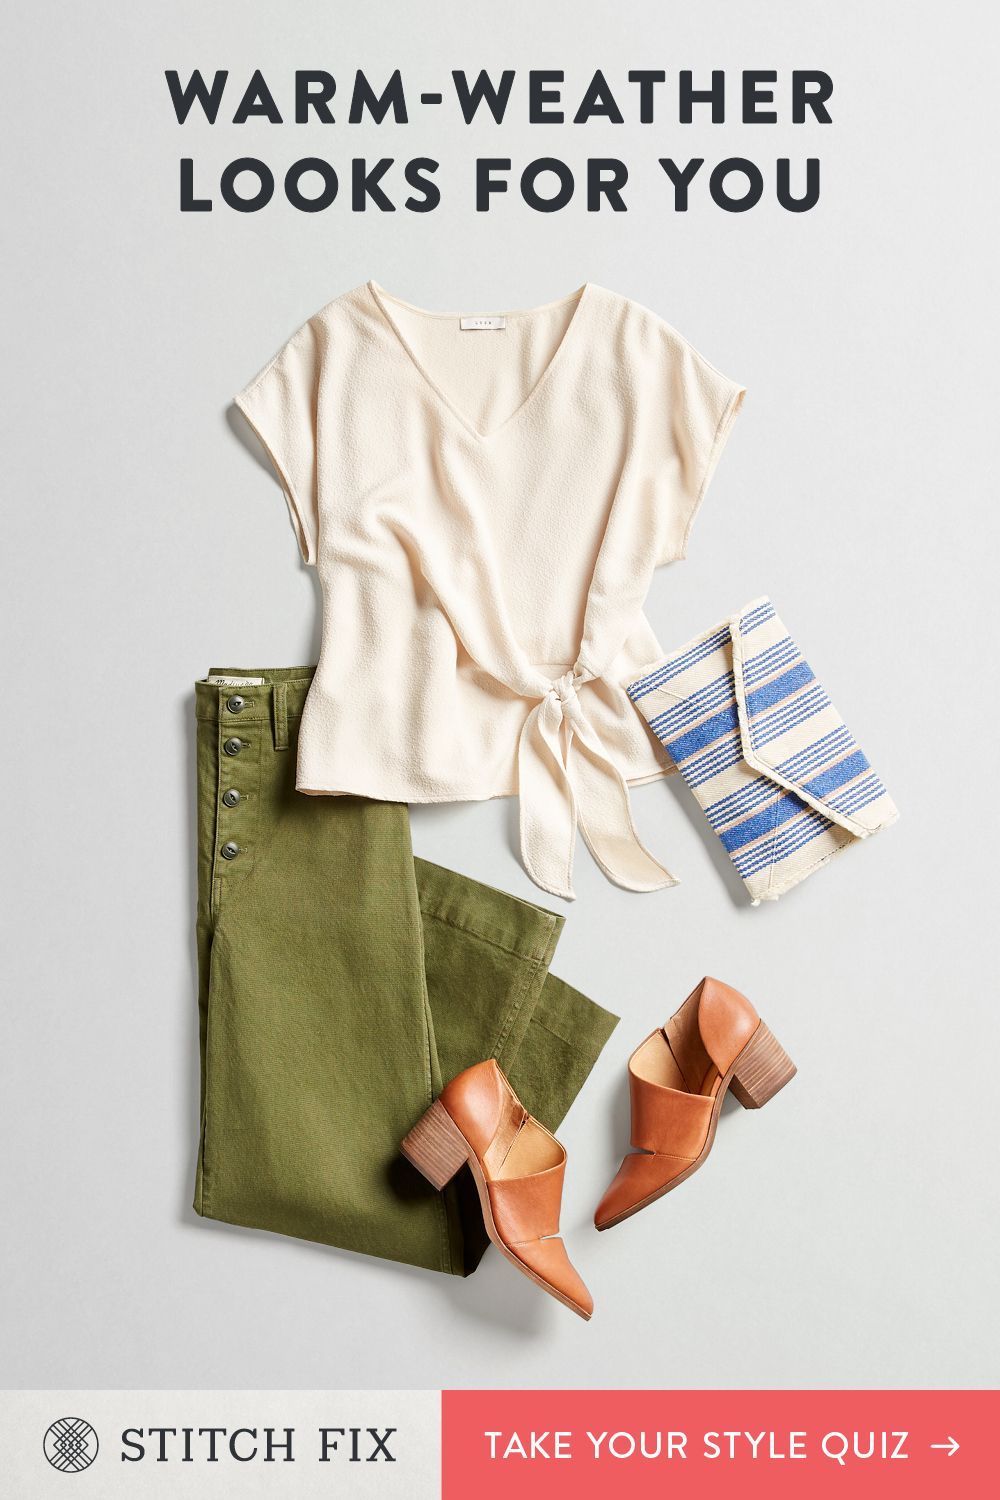 Stitch Fix’s process of sending hand-selected pieces from a Personal Stylist lets us concentrate on the important details of your look—your taste, size & price preferences. You’ll always get pieces that fit your precise measurements and individual style. Shipping, returns & exchanges are always free. Plus, there’s no subscription required. Sign up now and make this your most stylish season yet. -   21 DIY Clothes Winter easy
 ideas